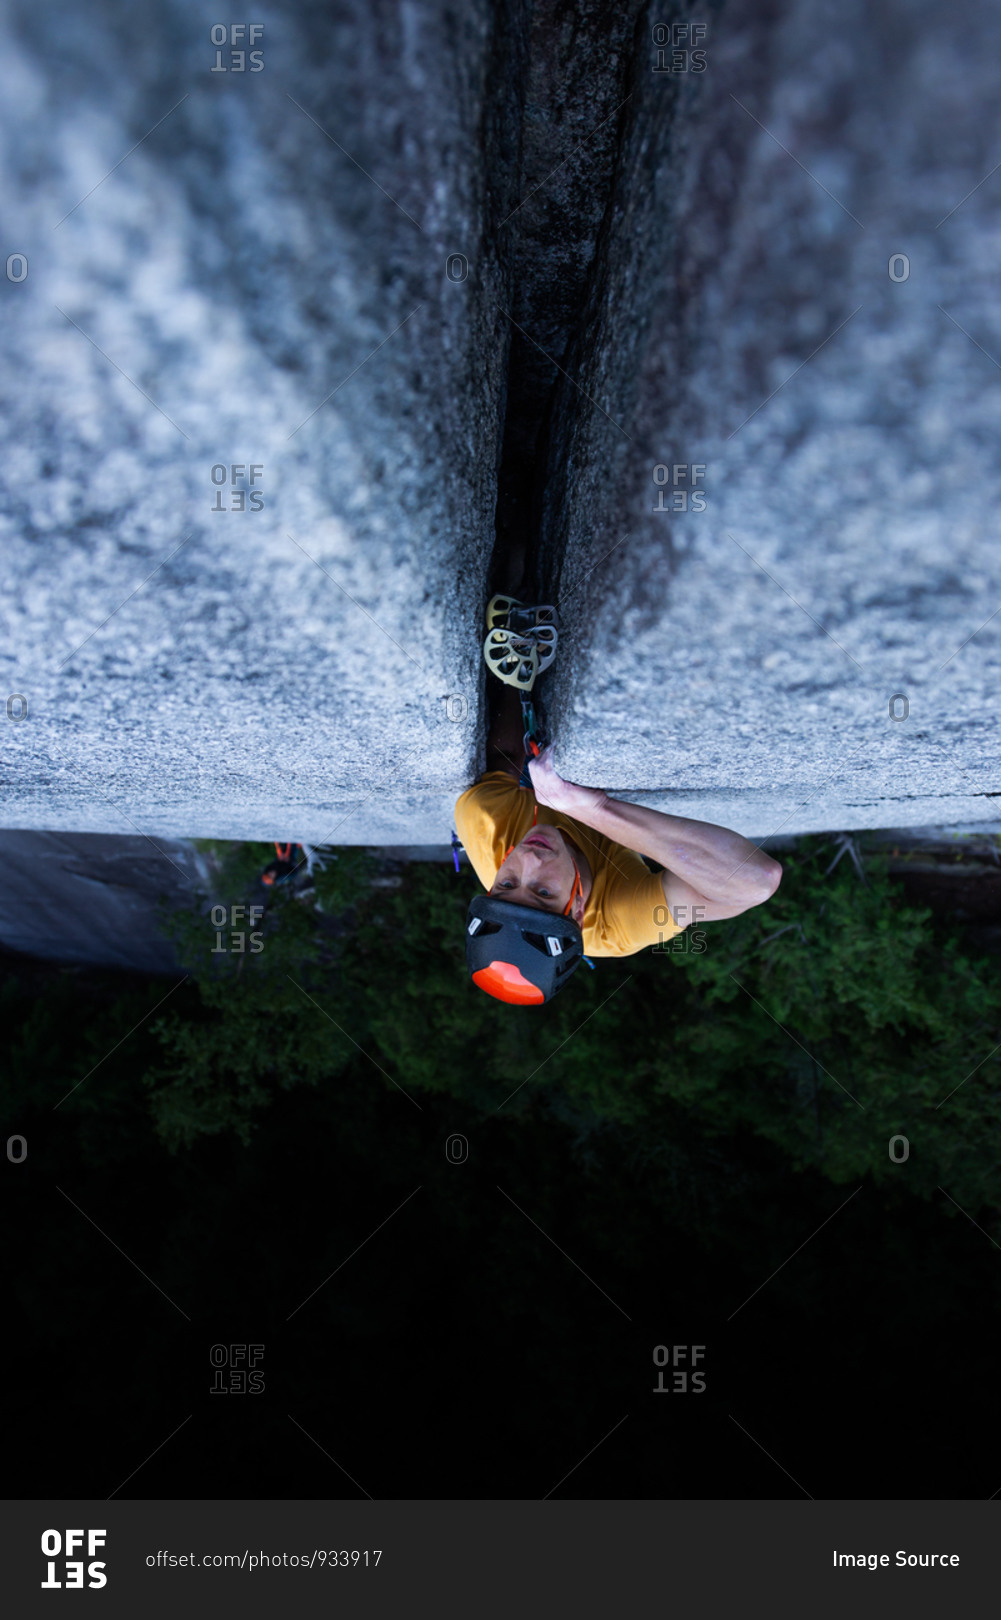 A climber traditional climbing  on granite, Tantalus Wall, Squamish